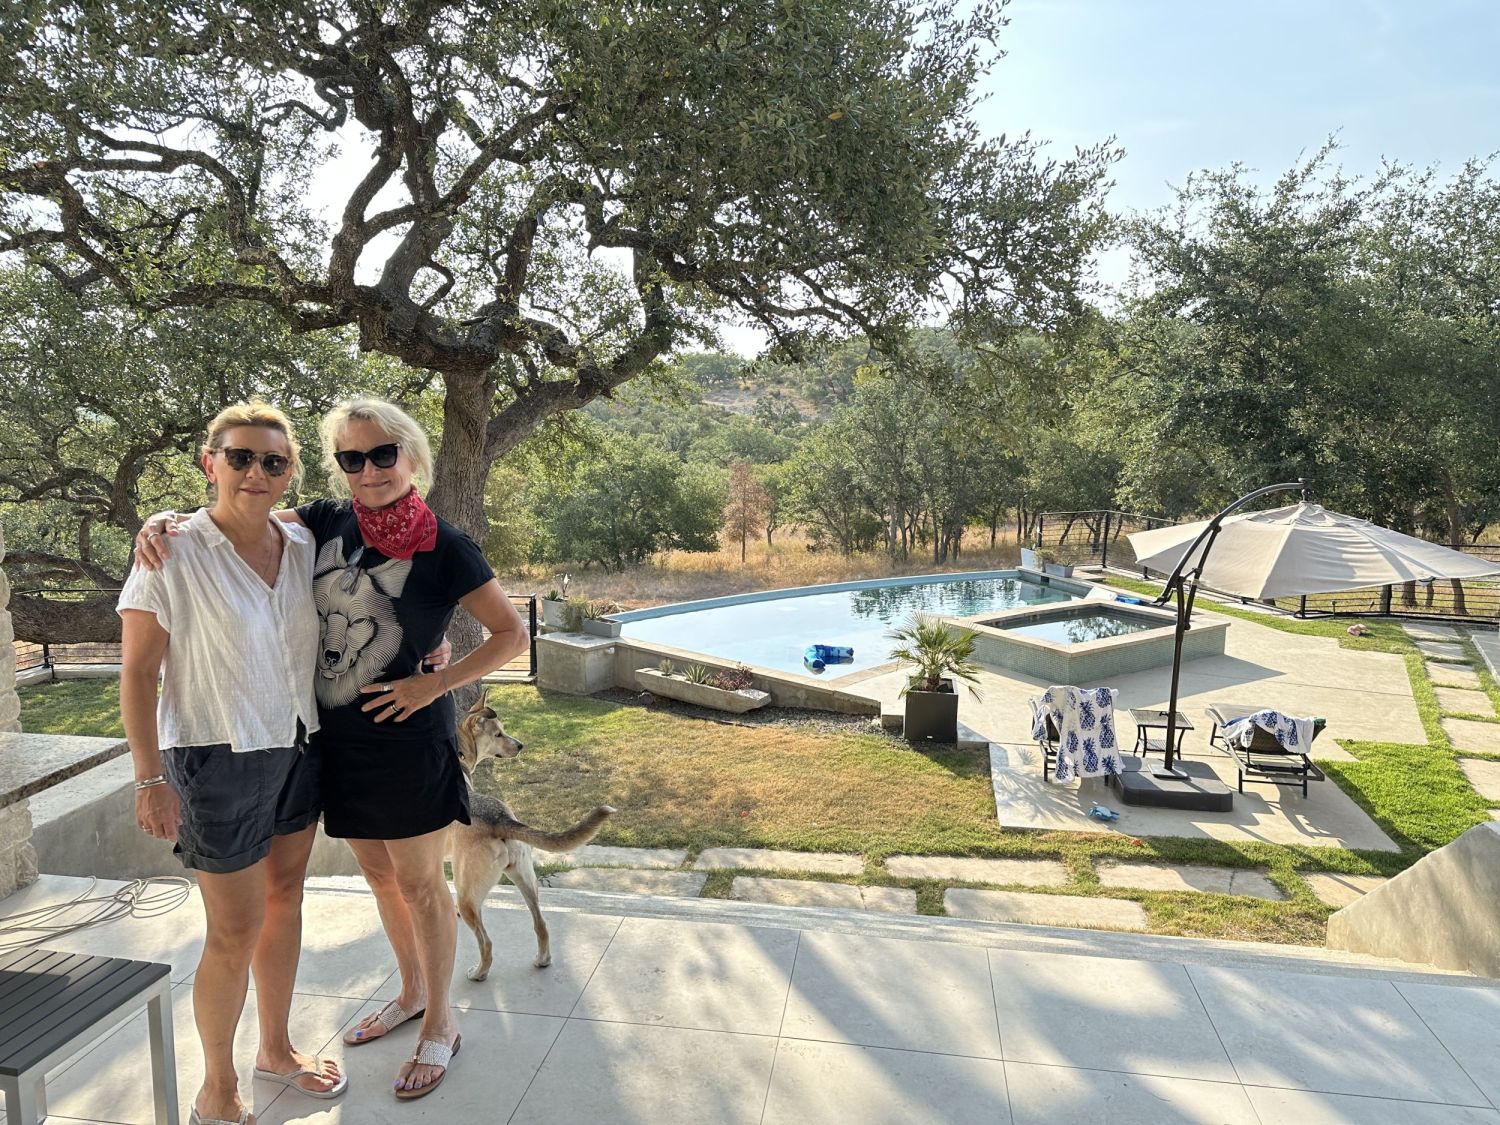 We had such a wonderful time at Clark and Mary's beautiful home in New Braunfels ,Texas